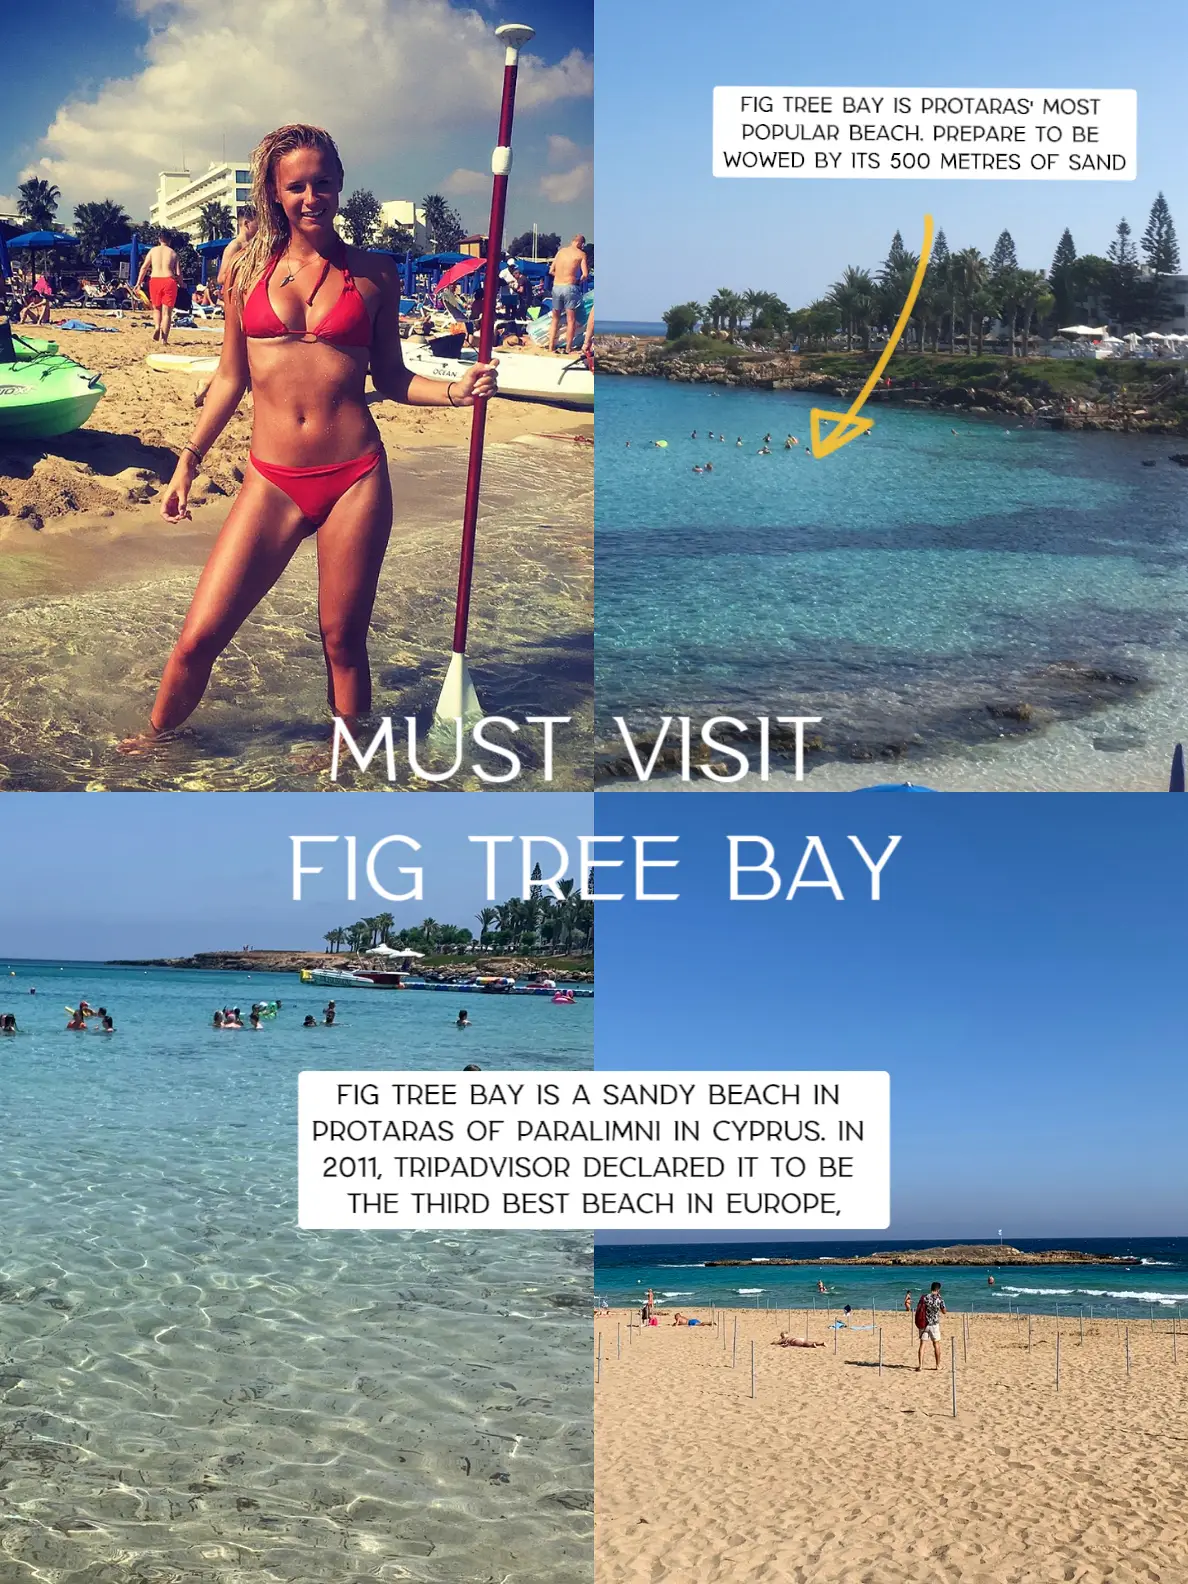 Tips for Traveling to Ayia Napa - Lemon8 Search